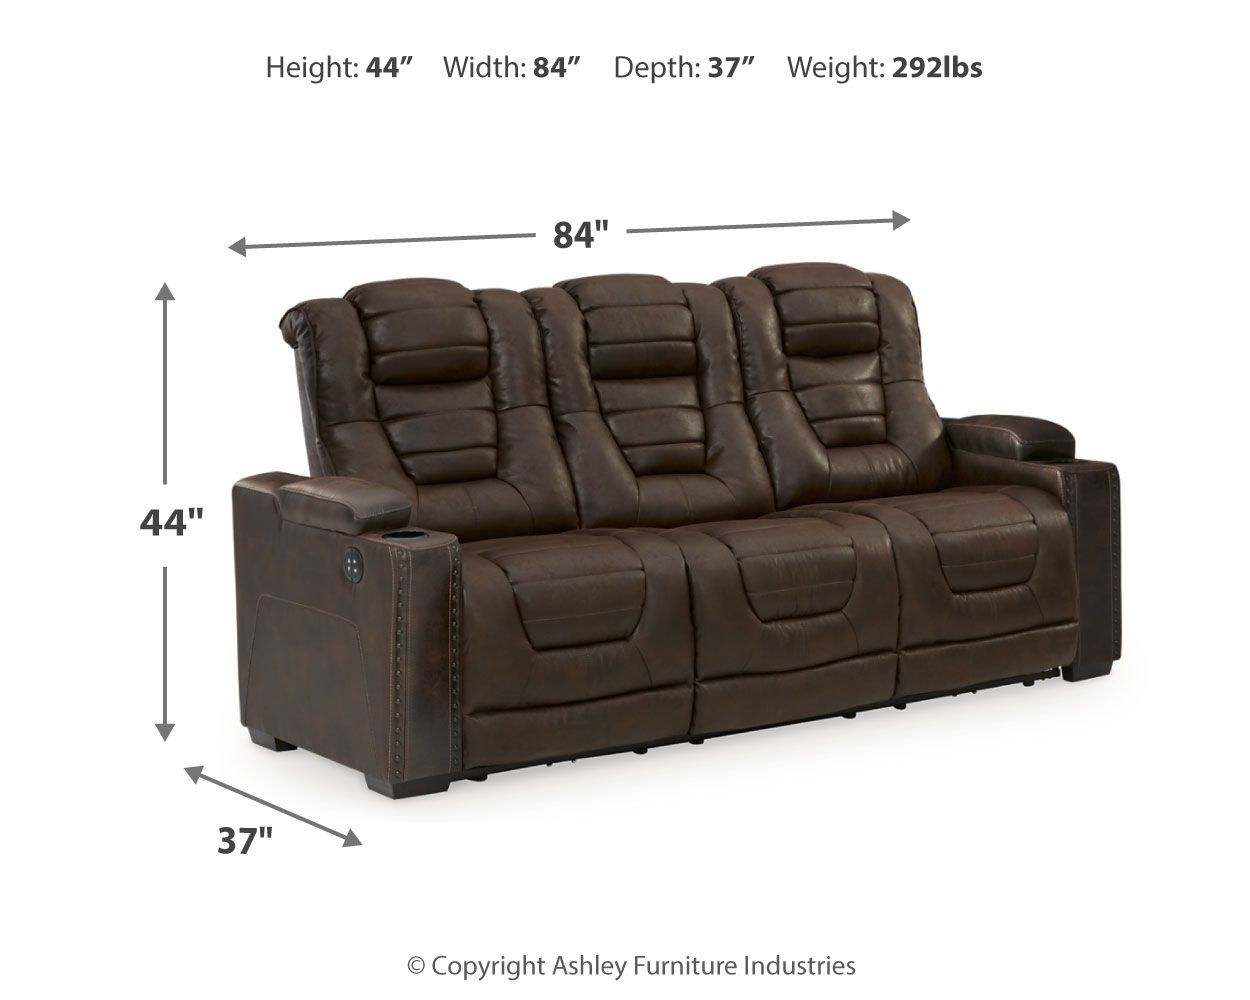 Owner's Box - Thyme - Pwr Rec Sofa With Adj Headrest